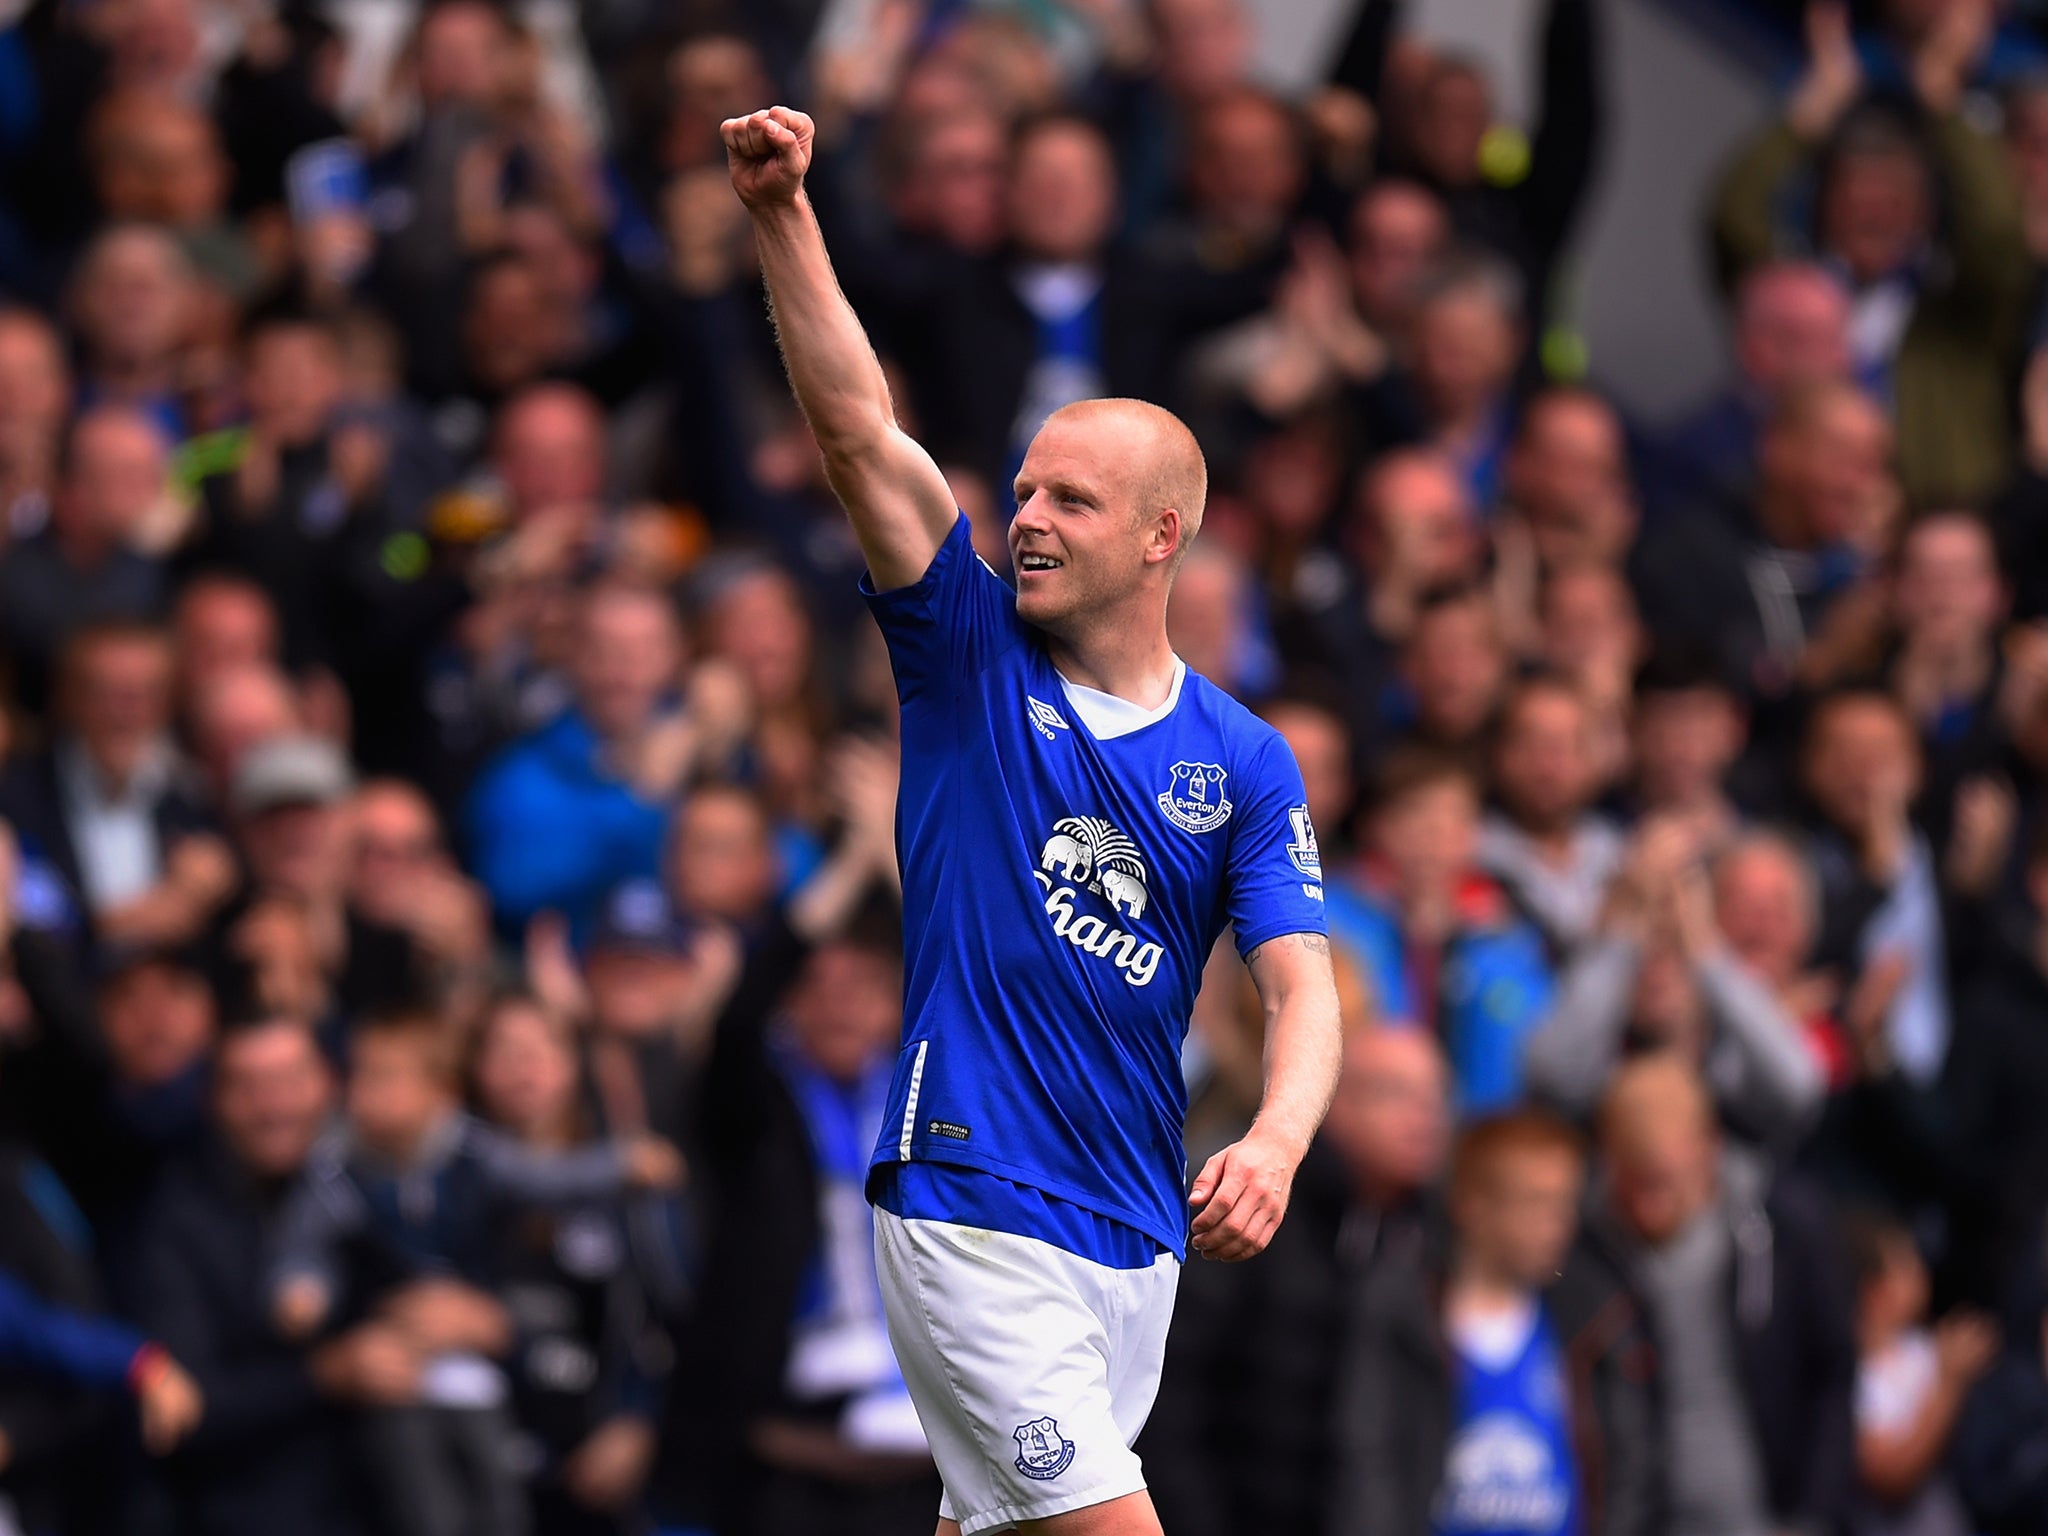 Steven Naismith could soon be saying goodbye to Goodison Park